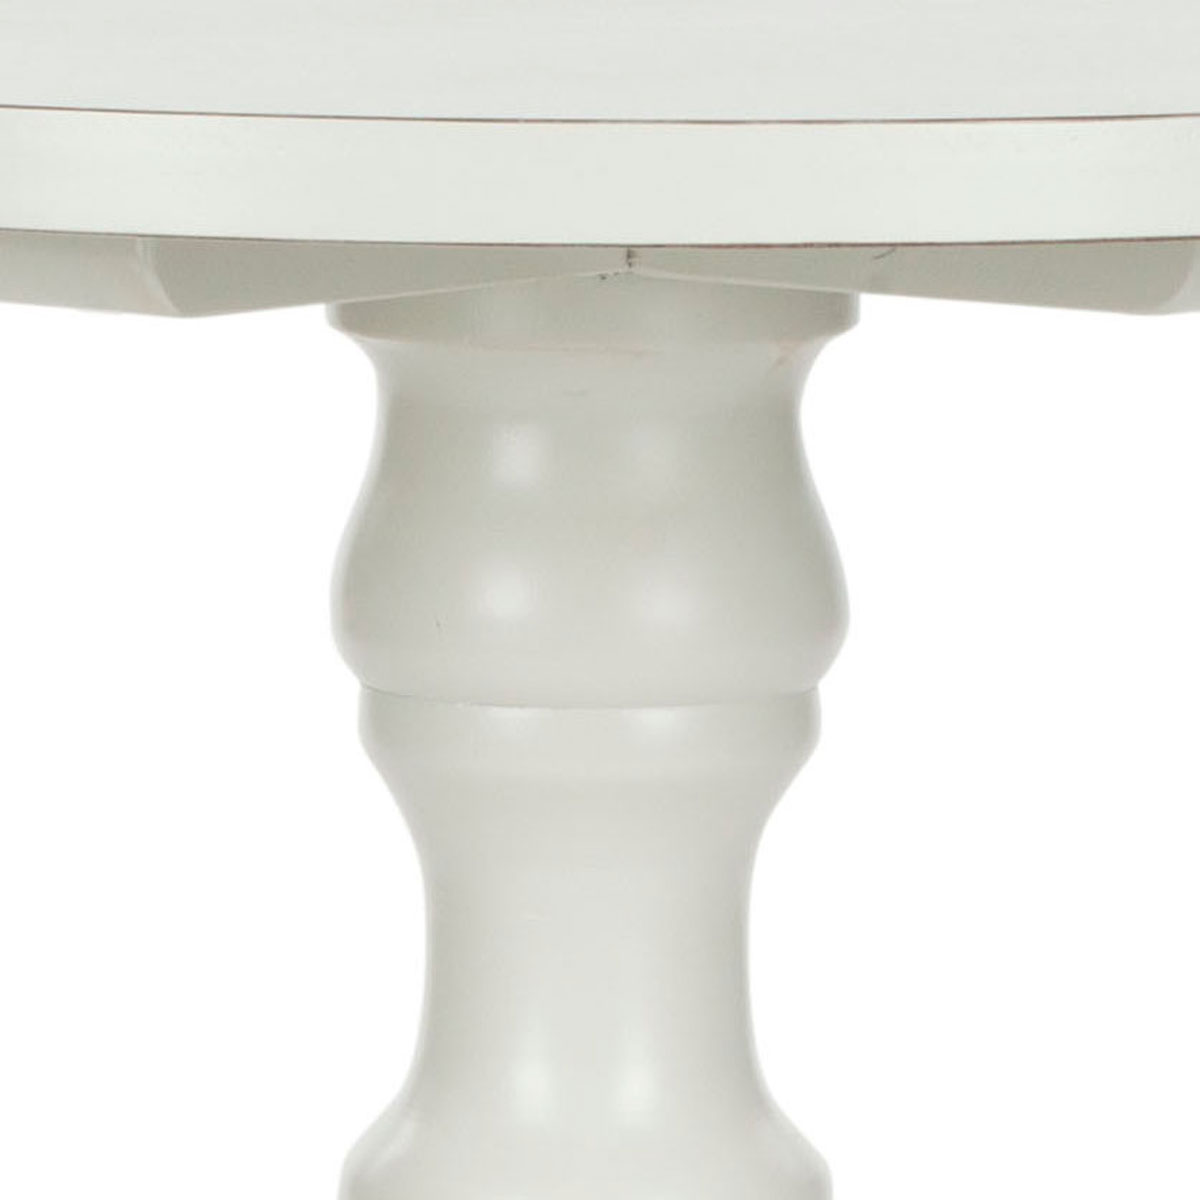 accent tables furniture safavieh swatch vintage white table with its rubbed off finish this sturdy poplar adds just the right amount modern bedroom living room even mosaic top